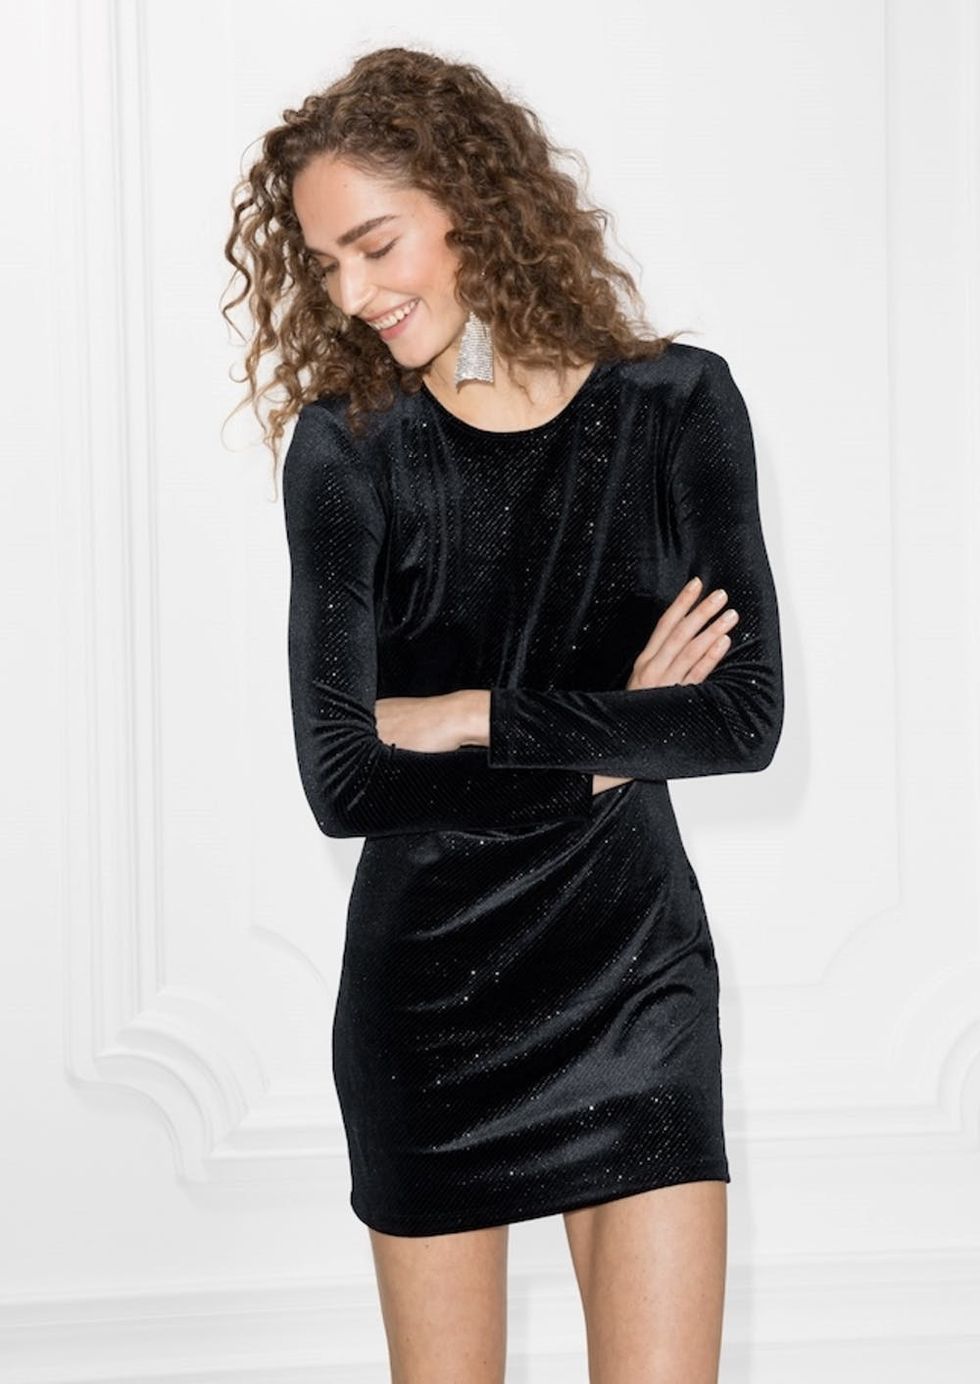 10 Velvet Party Dresses for Cold Nights Out - Brit + Co